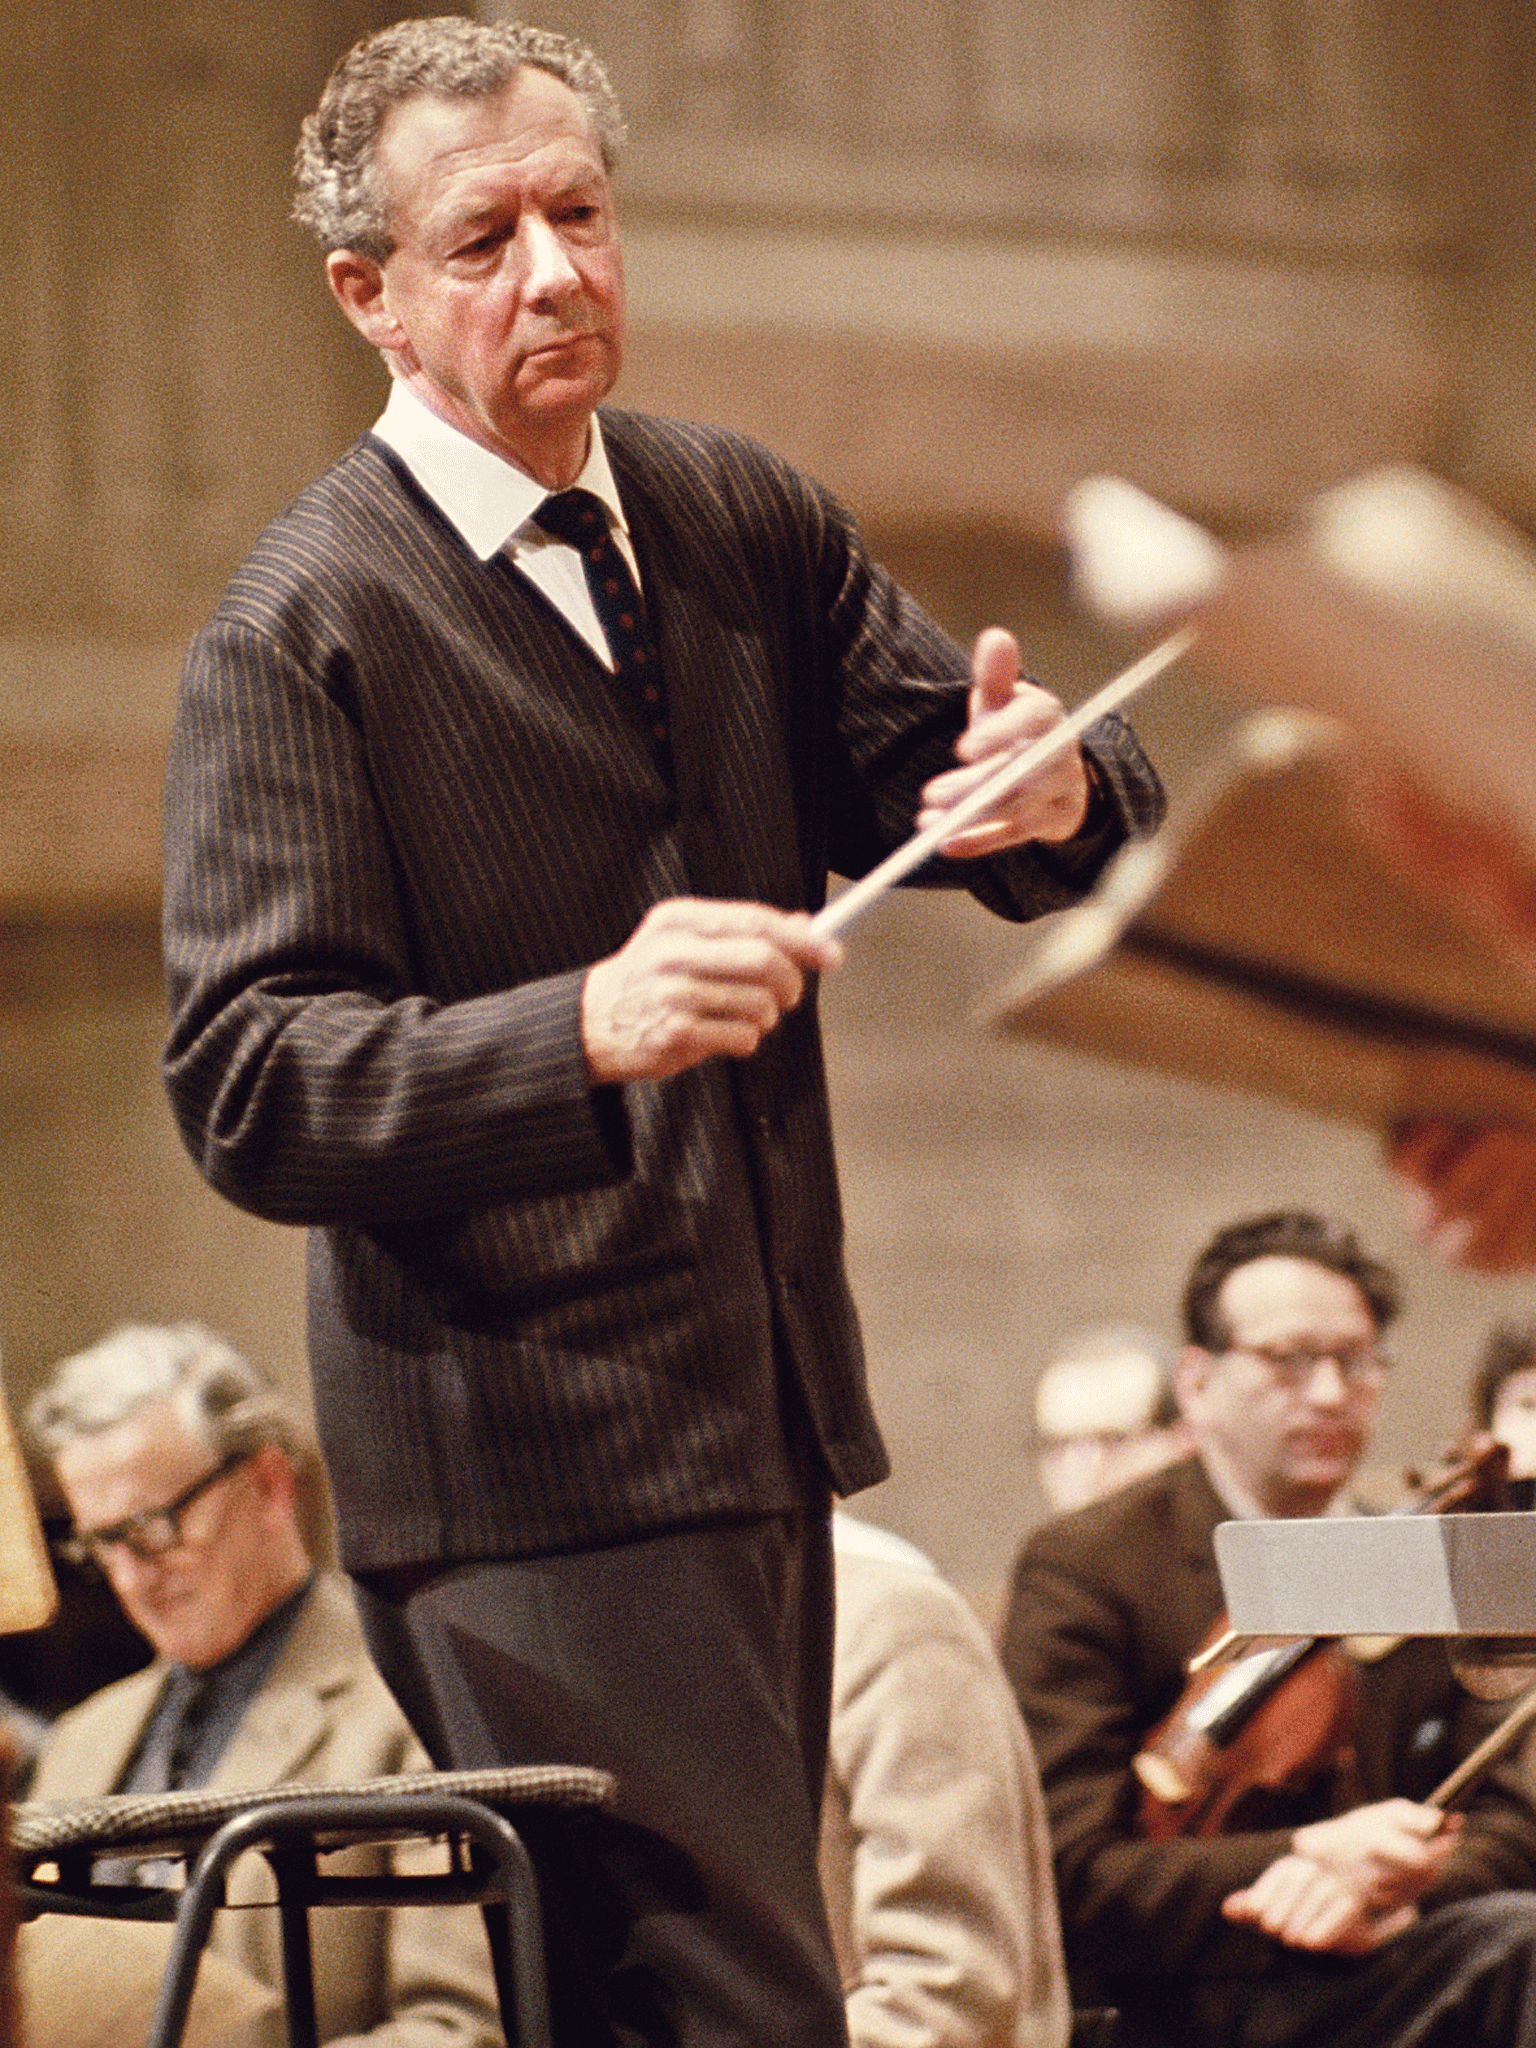 Hitting the high notes: Benjamin Britten conducting in the 1960s